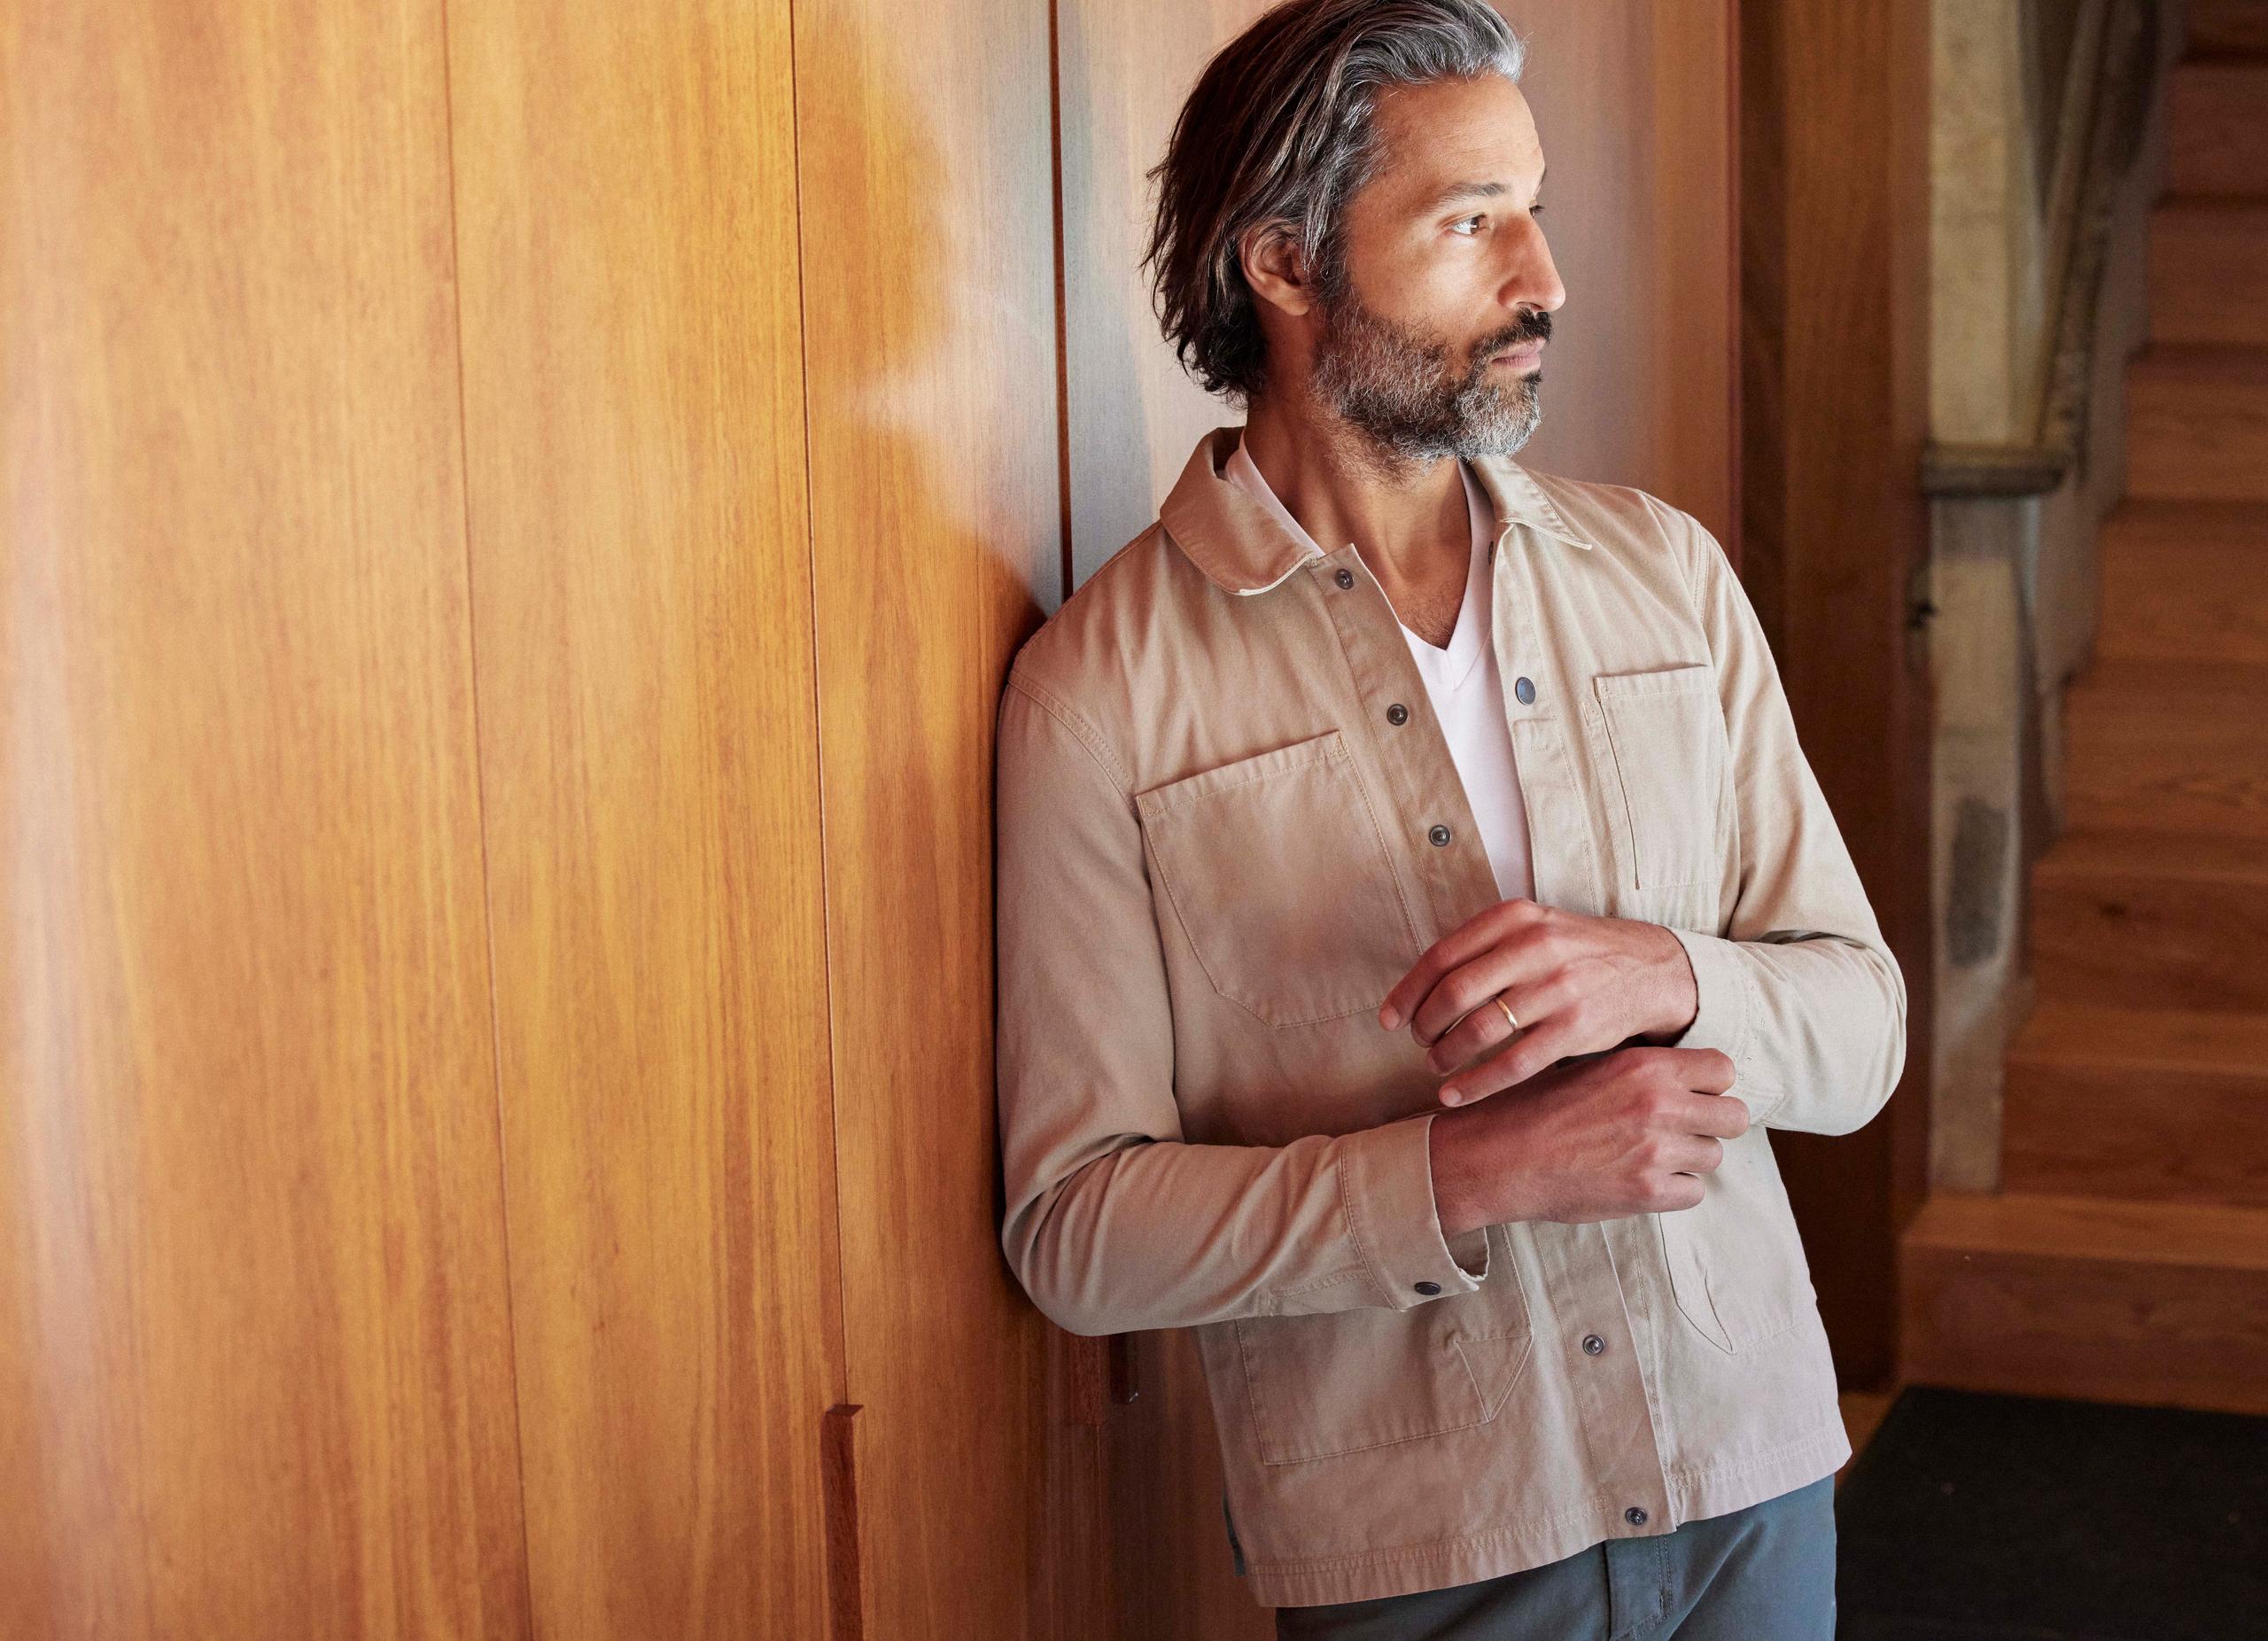 Man wearing Motto Cotton Chore Jacket leaning on wall of mid-century house interior